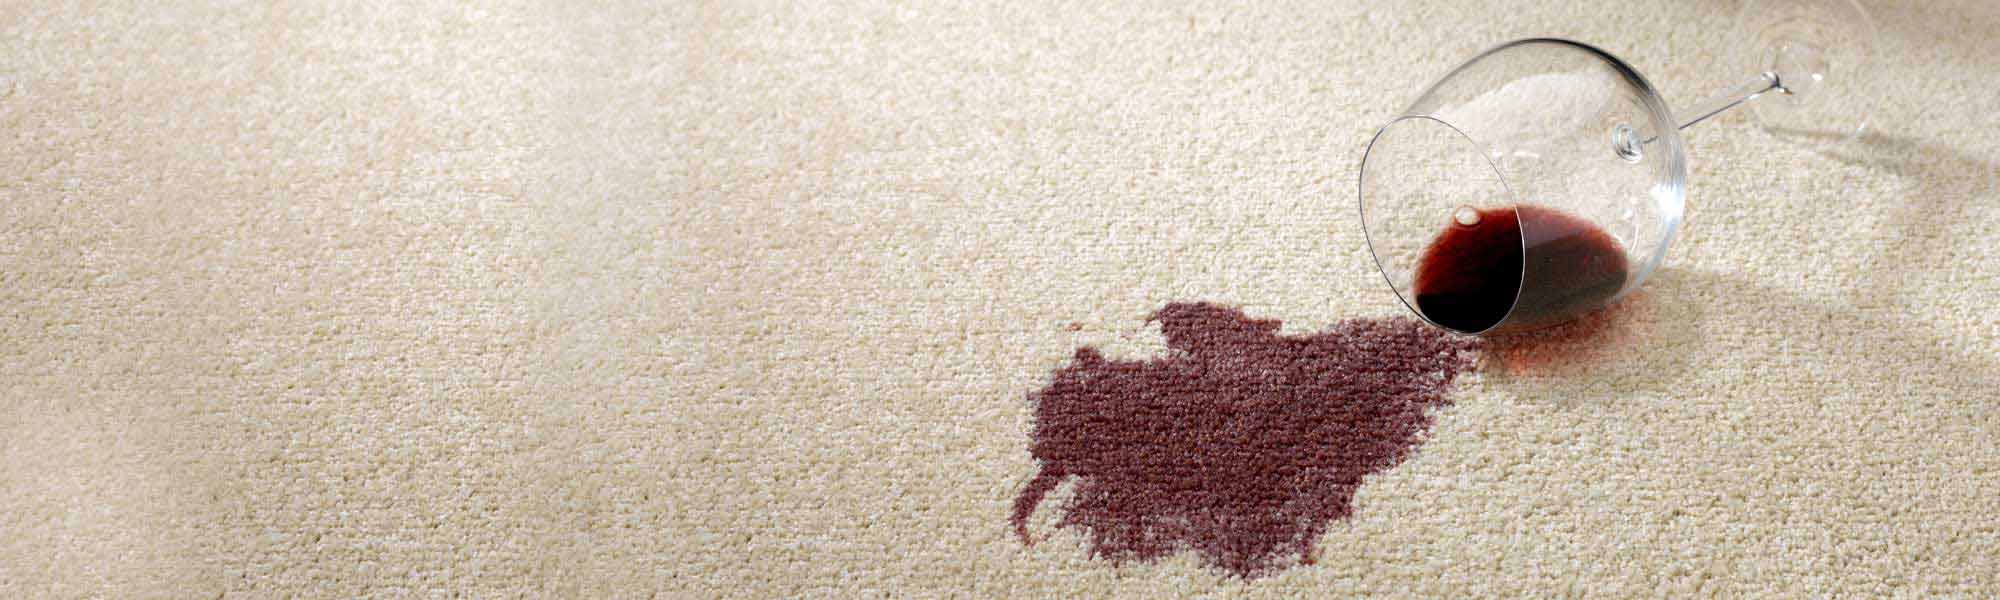 Red Wine Stain on Light Colored Carpet